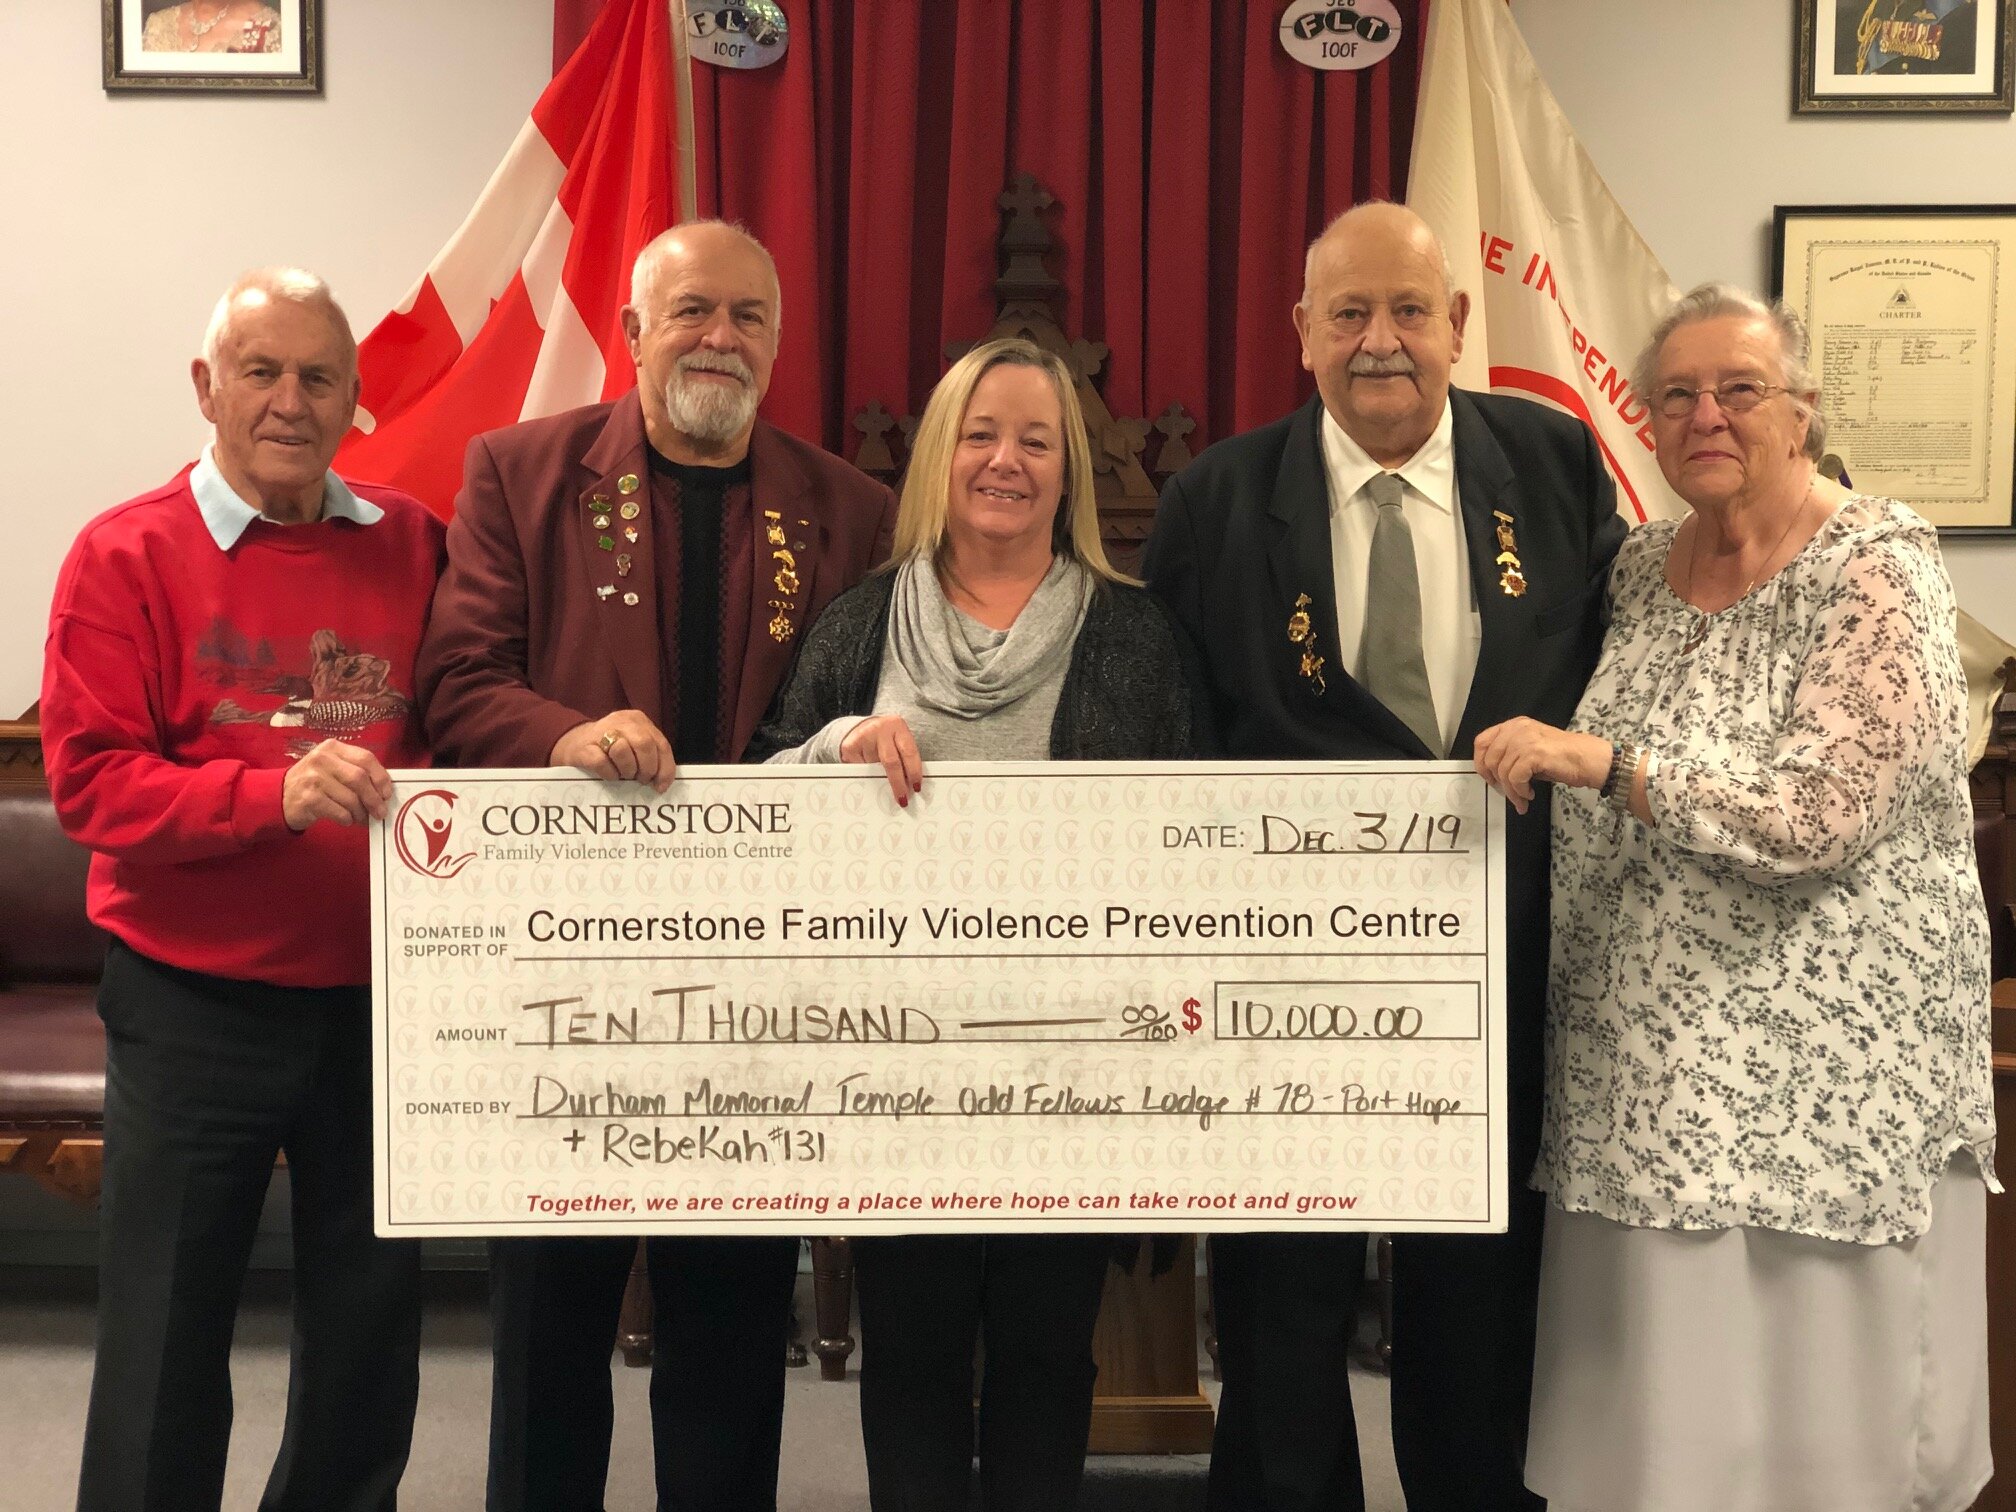  Cornerstone Family Violence Prevention Centre executive director Nancy Johnston (centre) was delighted to receive a $10,000 donation from the Durham Memorial Temple Oddfellows Lodge #78 Port Hope and Rebekahs #131 members (from left) Carl Nelson, Da